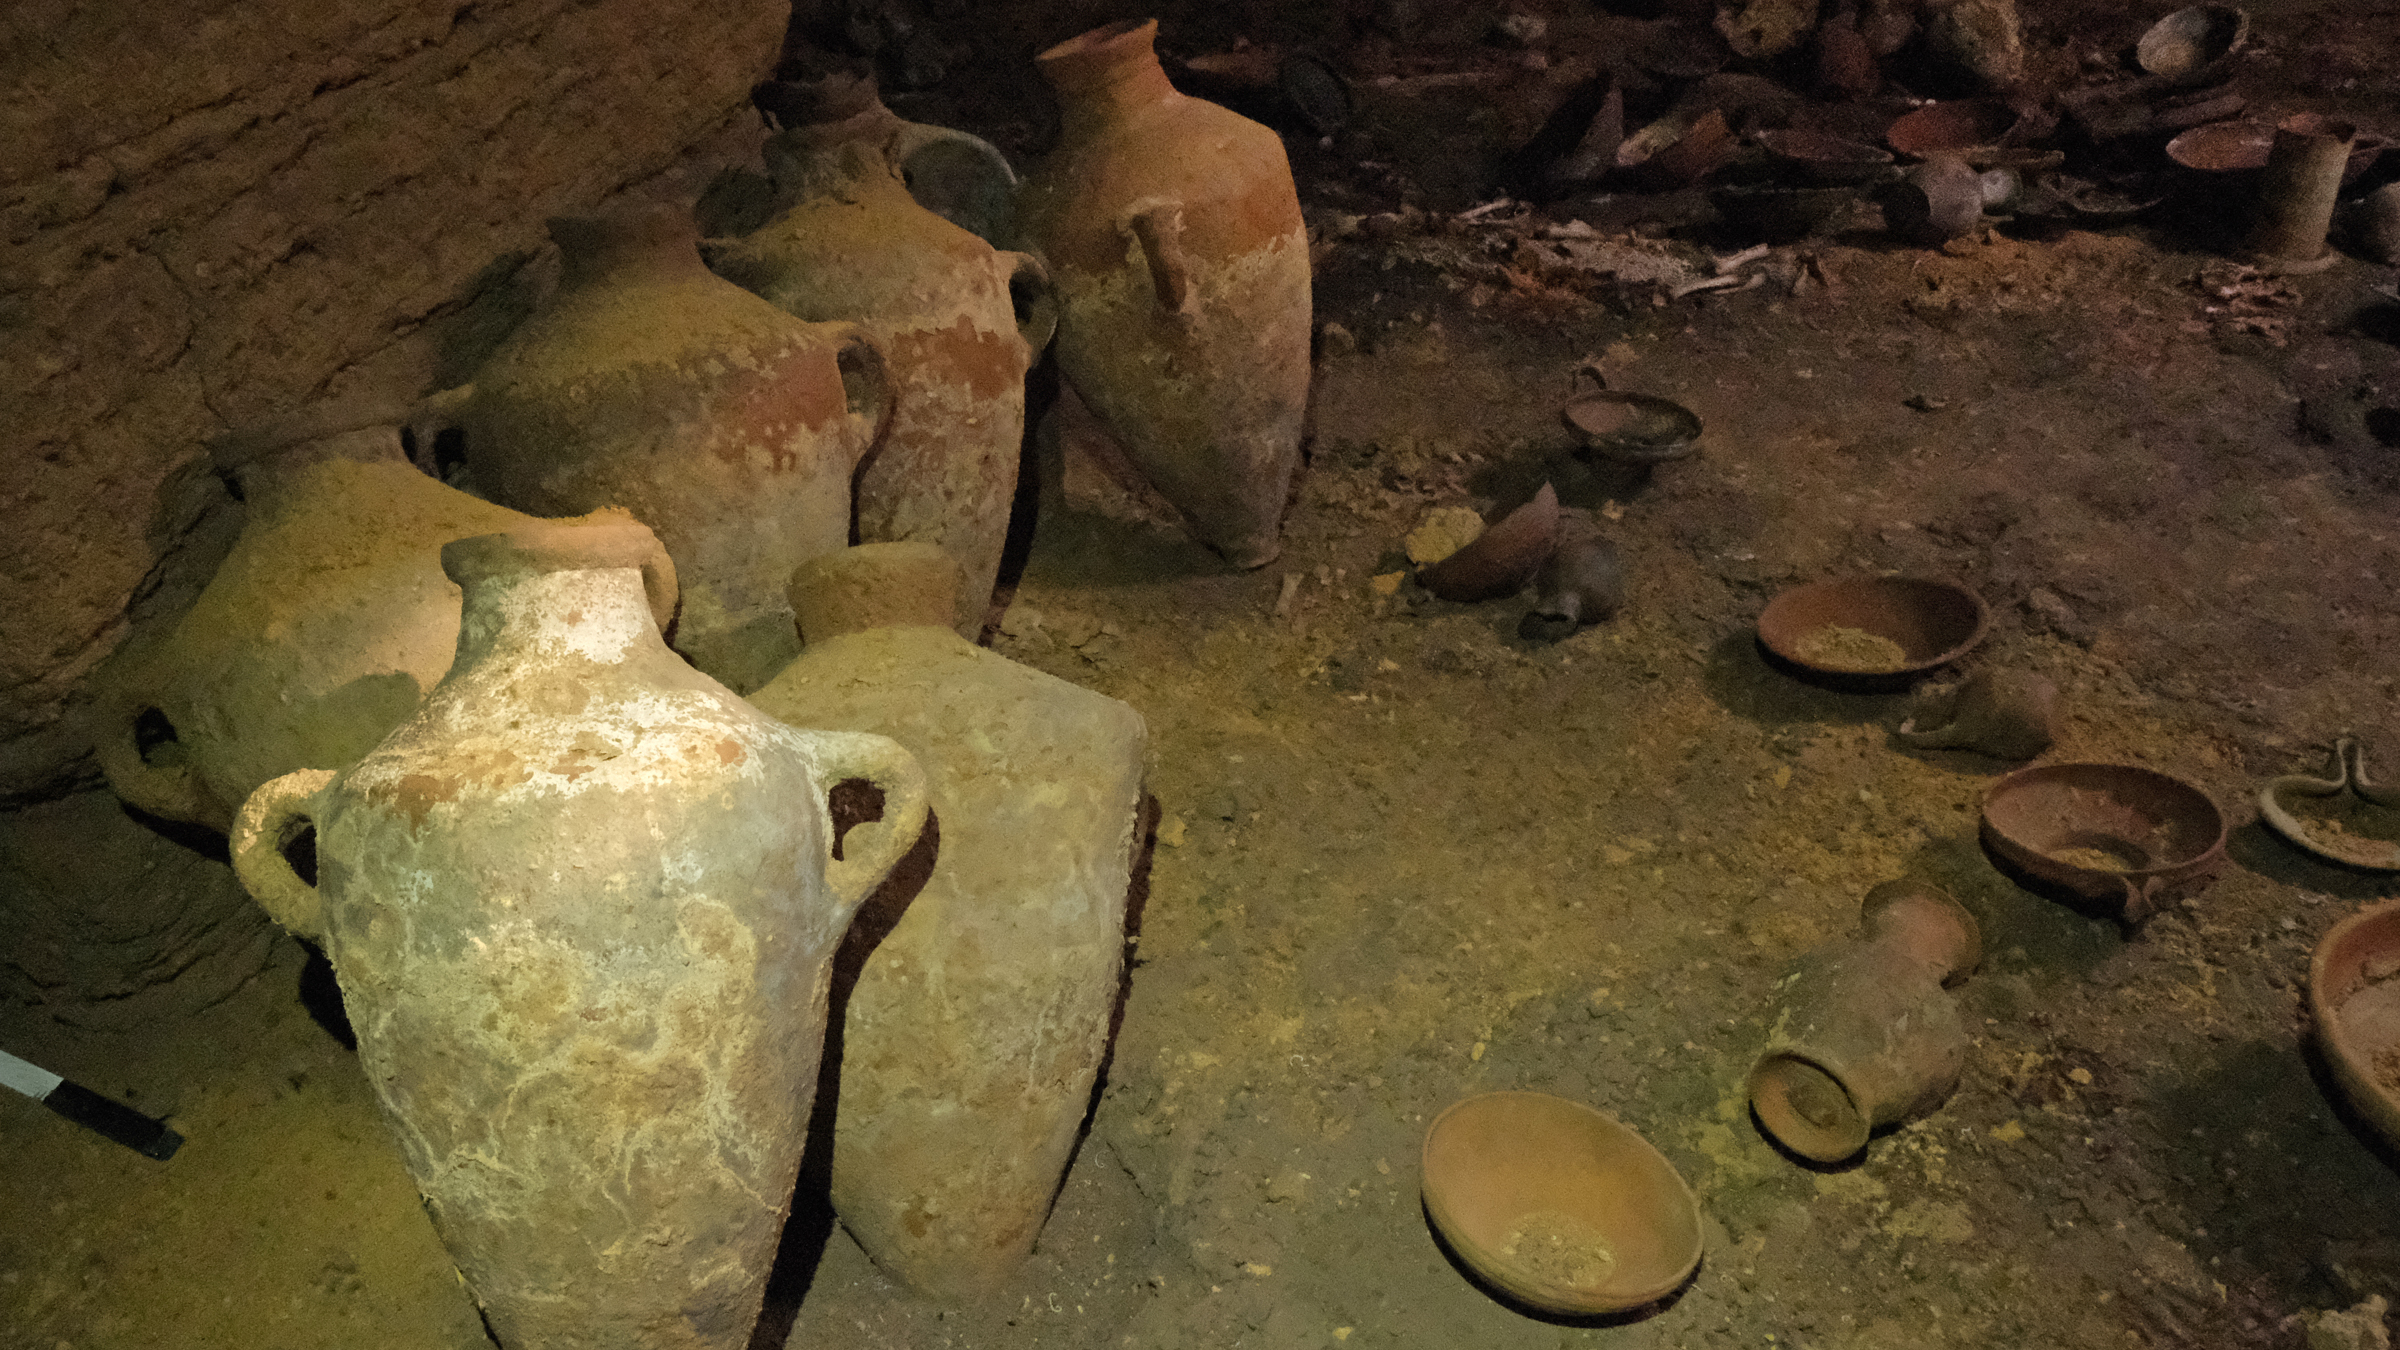 Dozens of examples of pottery were found in the cave. Some of them were imported from Syria, Cyprus and Lebanon in ancient times.